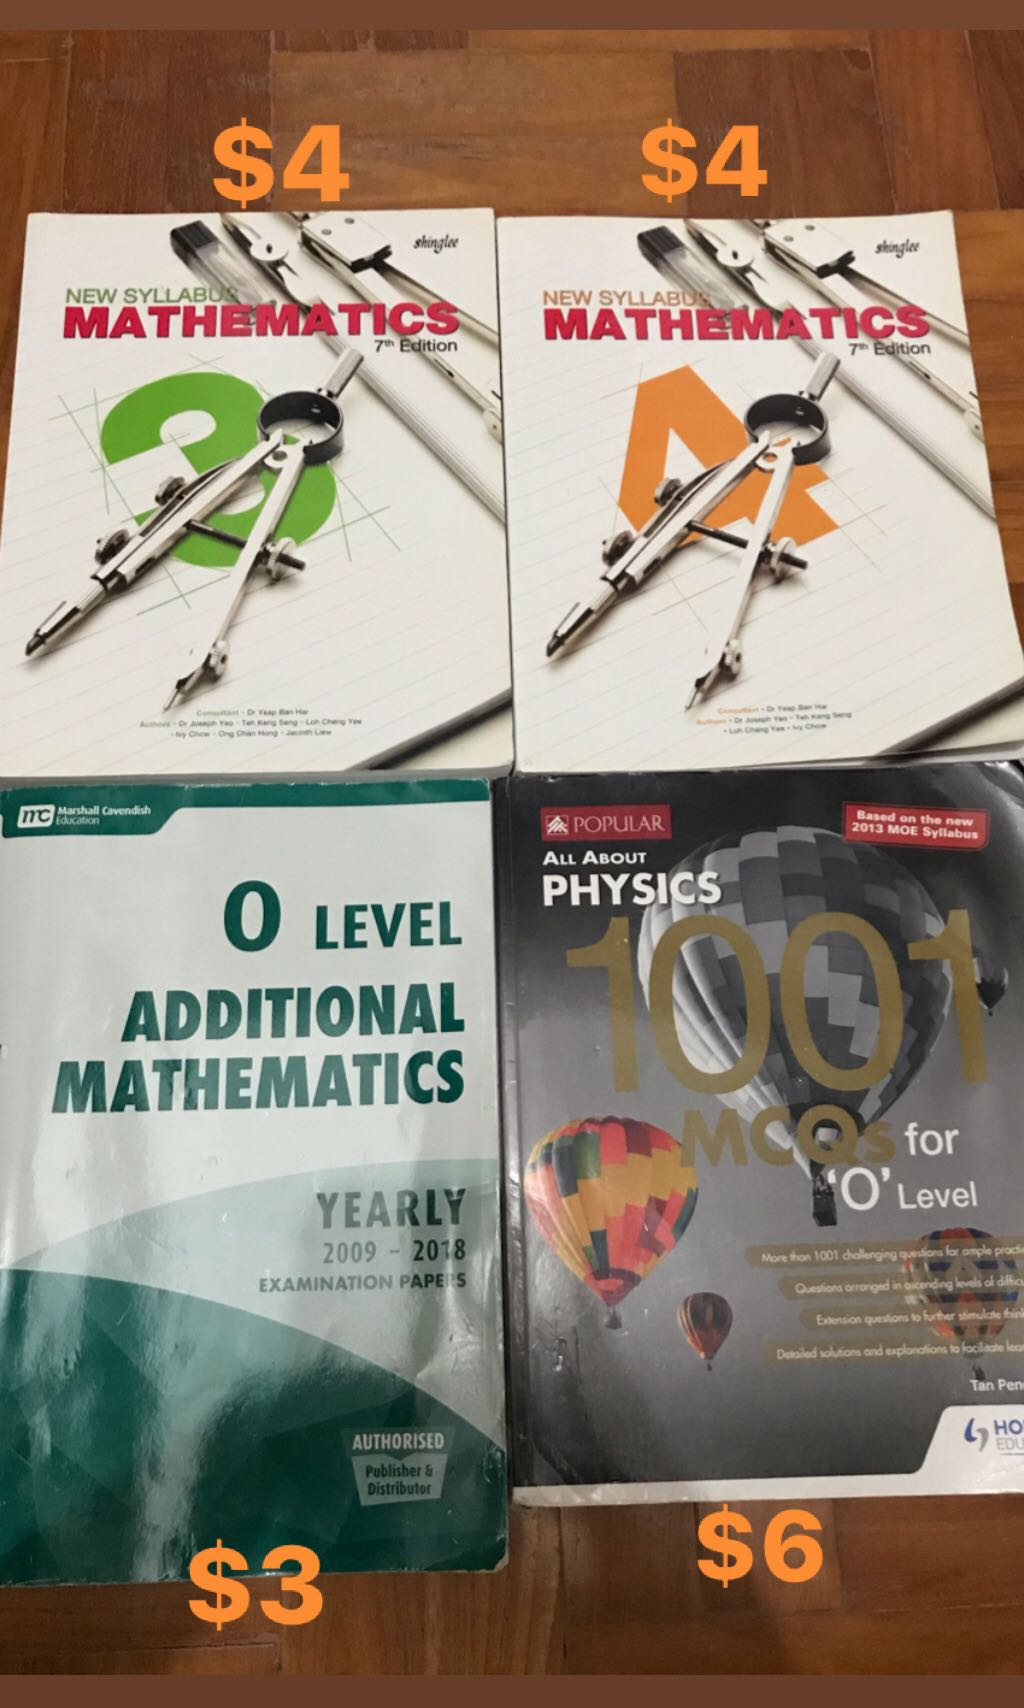 Upper Secondary Textbooks And Tys Hobbies And Toys Books And Magazines Textbooks On Carousell 7467